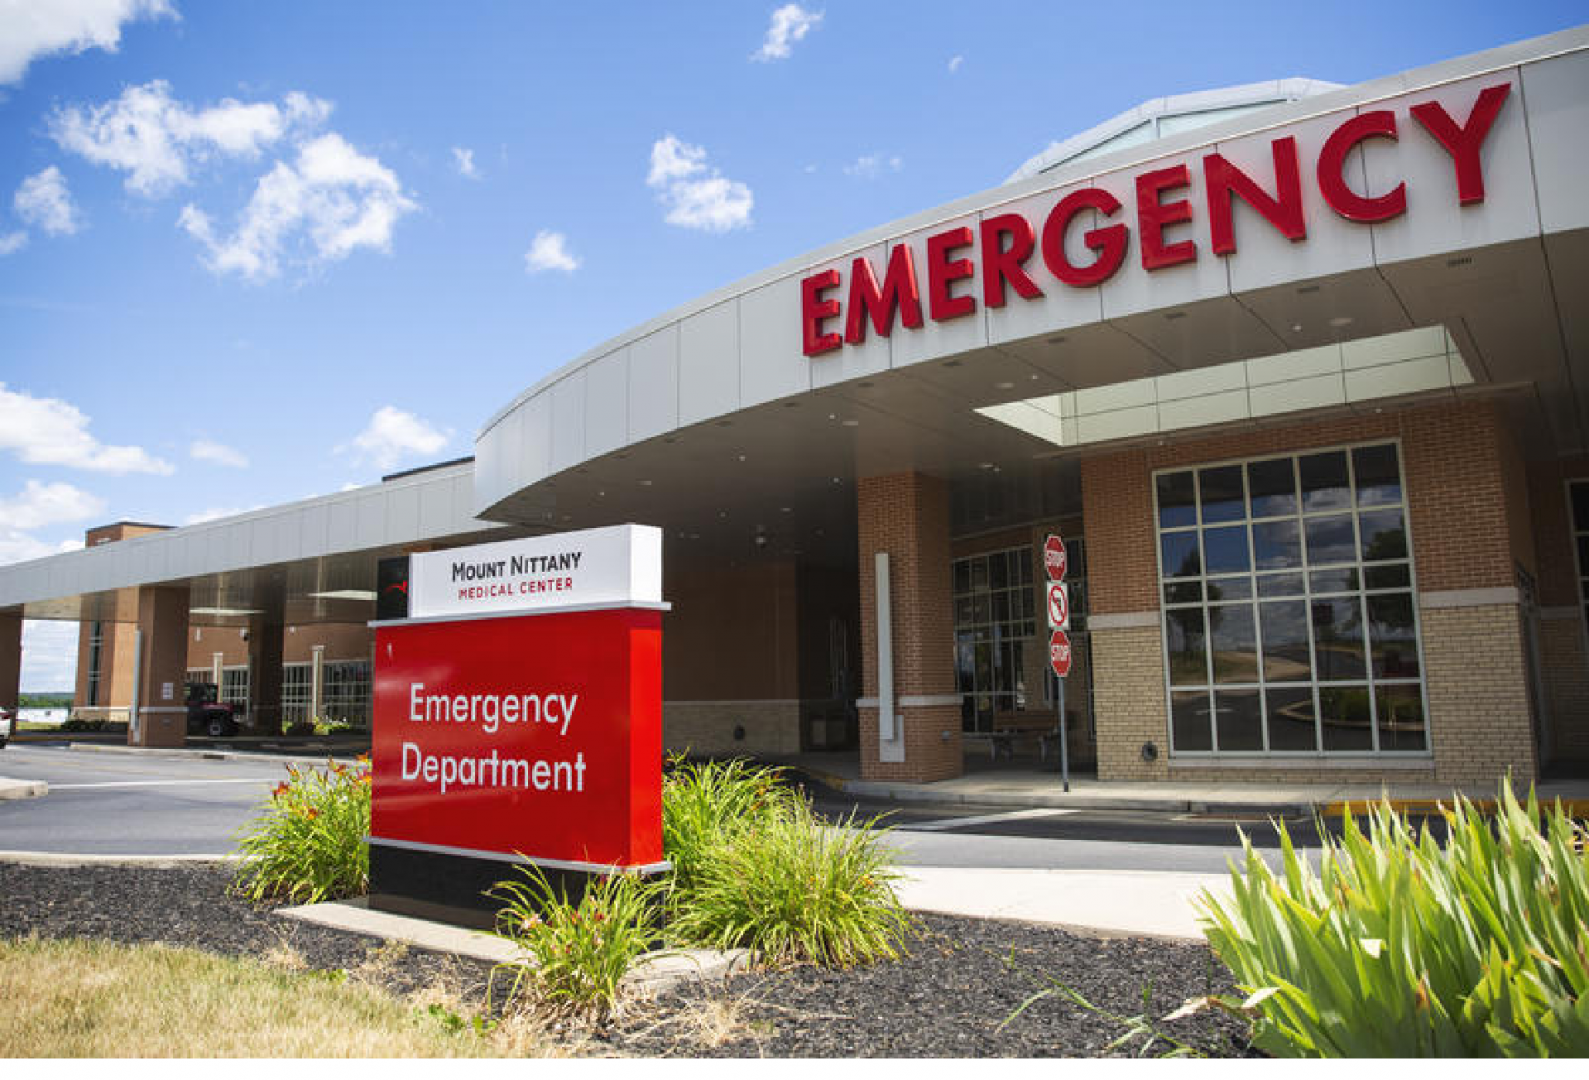 Facing some community concerns, Mount Nittany Health said the community should feel comfortable in its capacity to treat a potential surge of COVID-19 cases.
